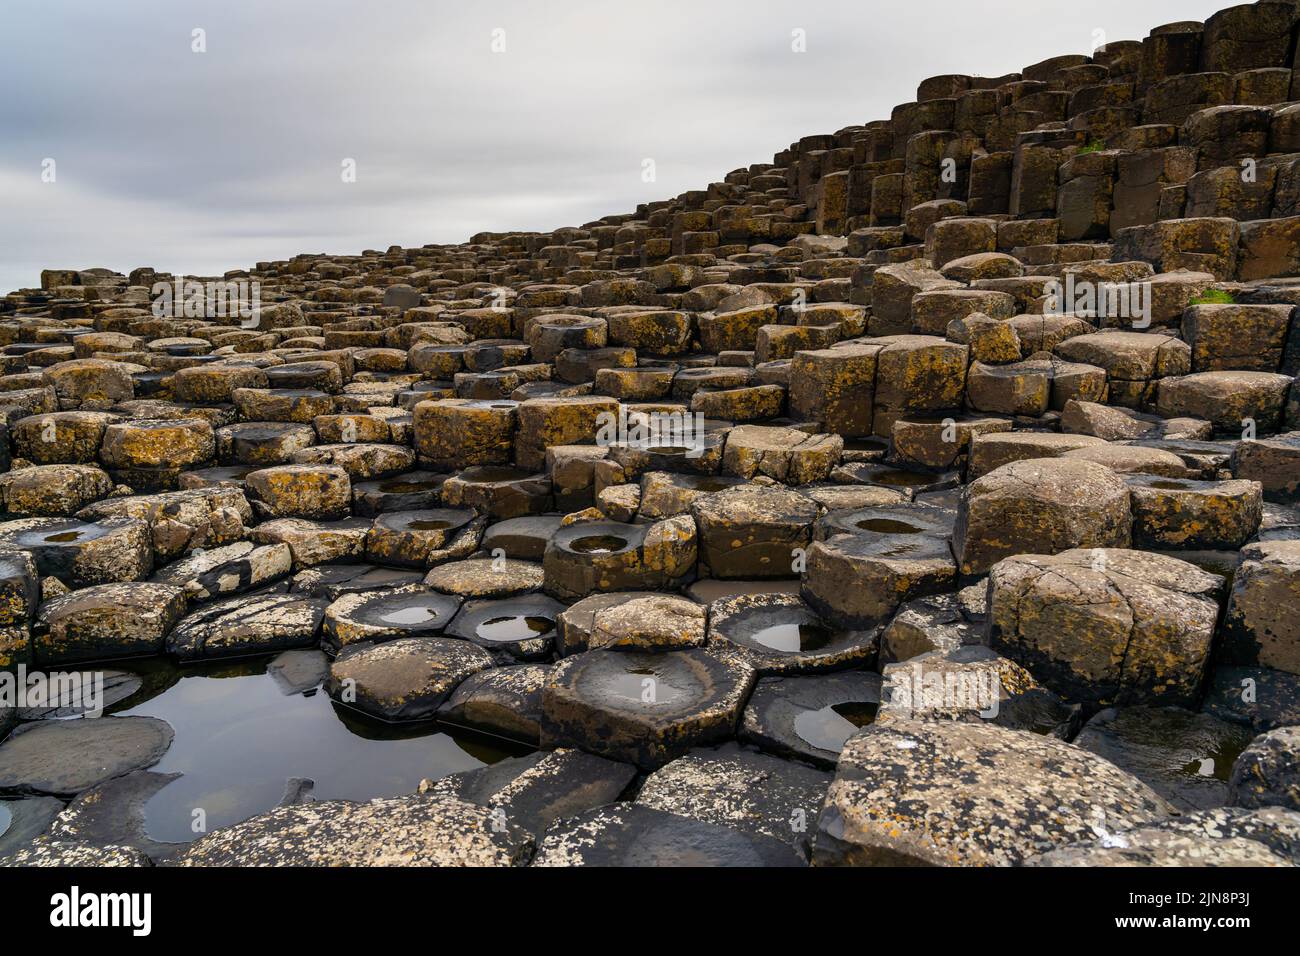 A view of the many volcanic basalt columns of the Giant's Causeway in Northern Ireland Stock Photo